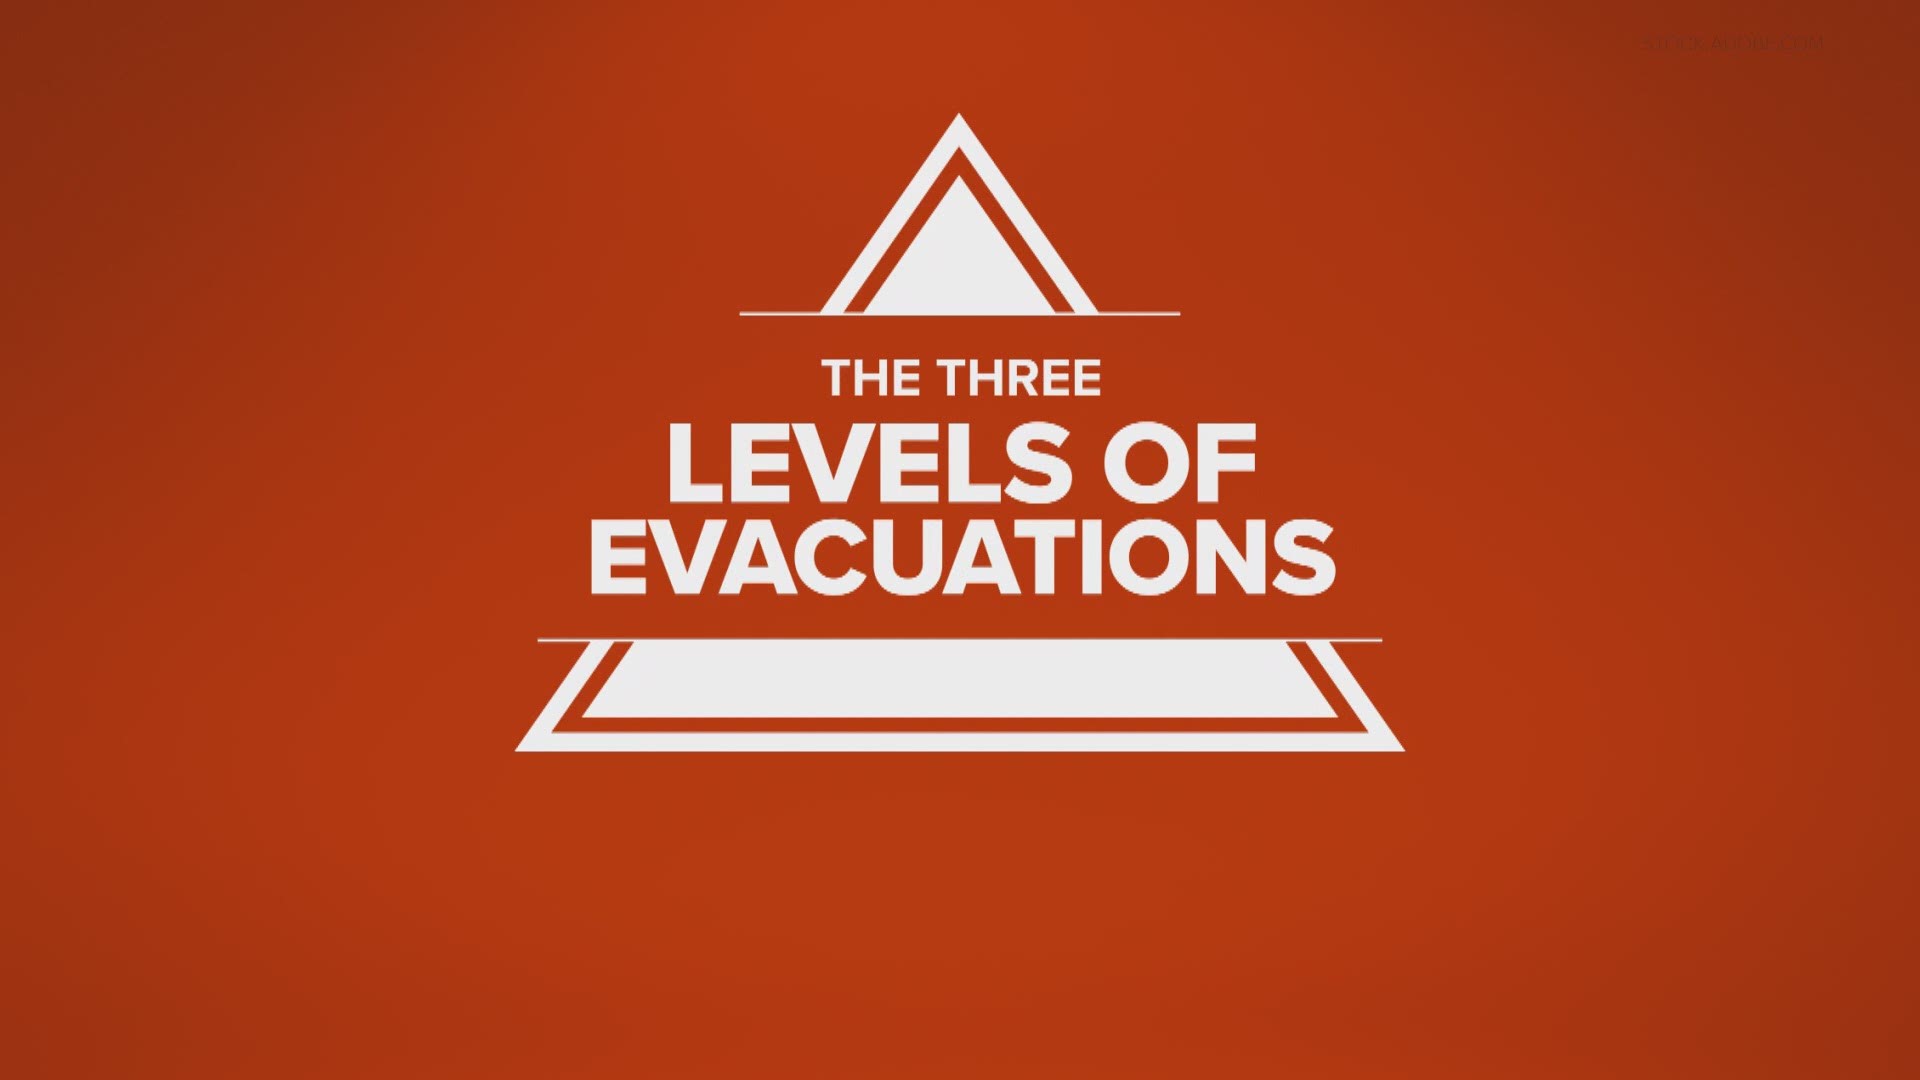 Different levels of evacuations require unique steps for residents during a wildfire.